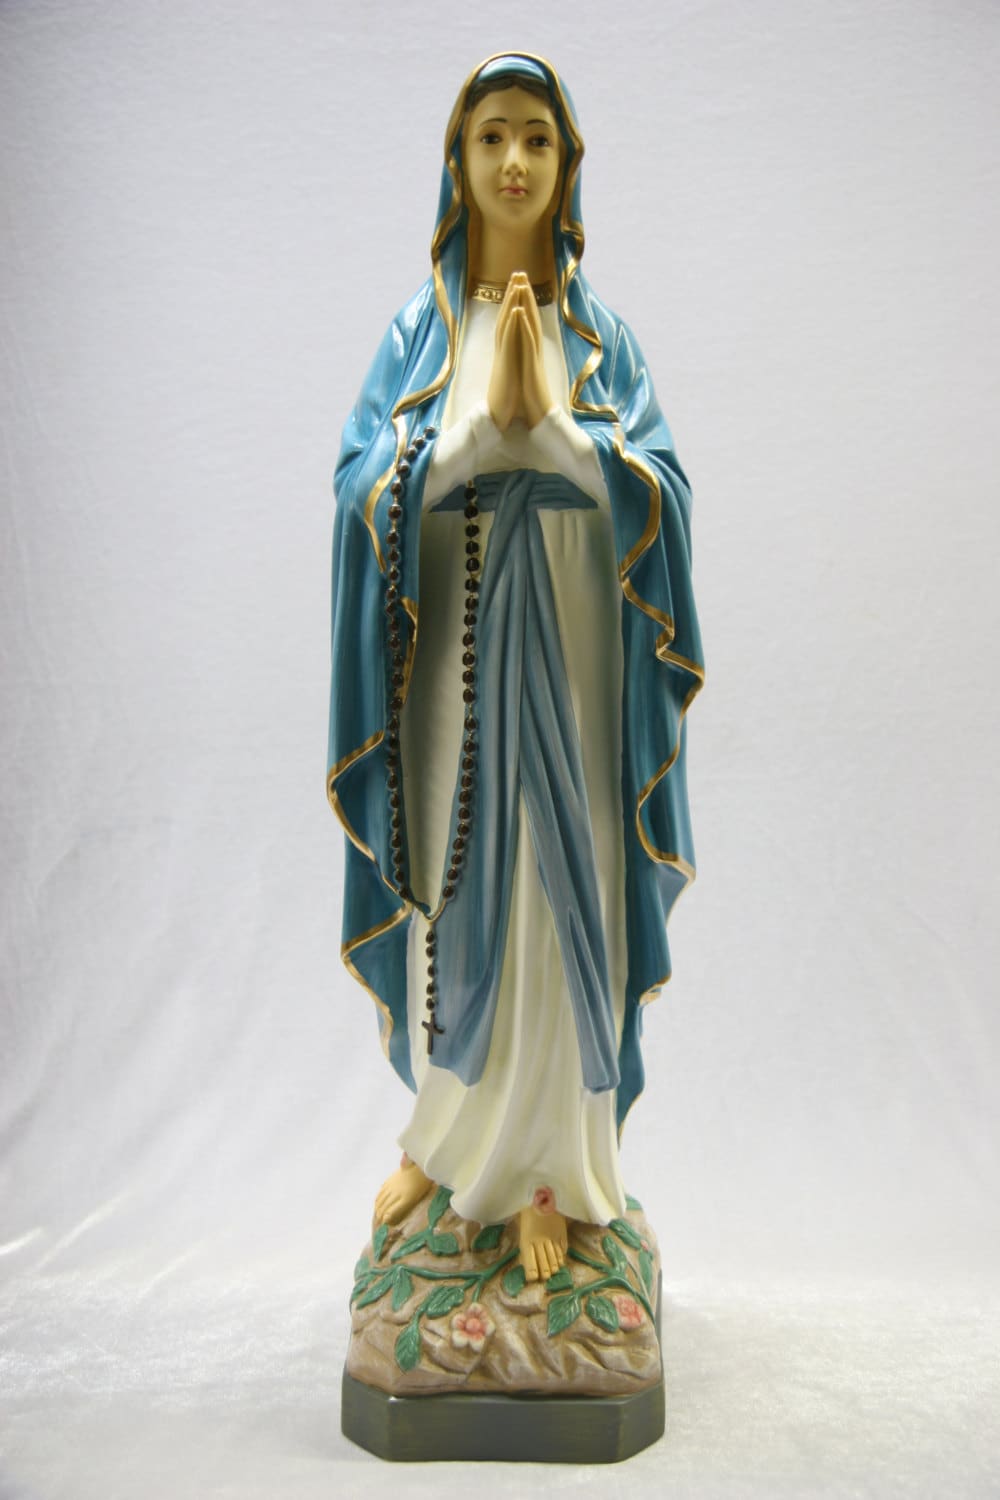 Our Lady of Lourdes Virgin Mary Statue